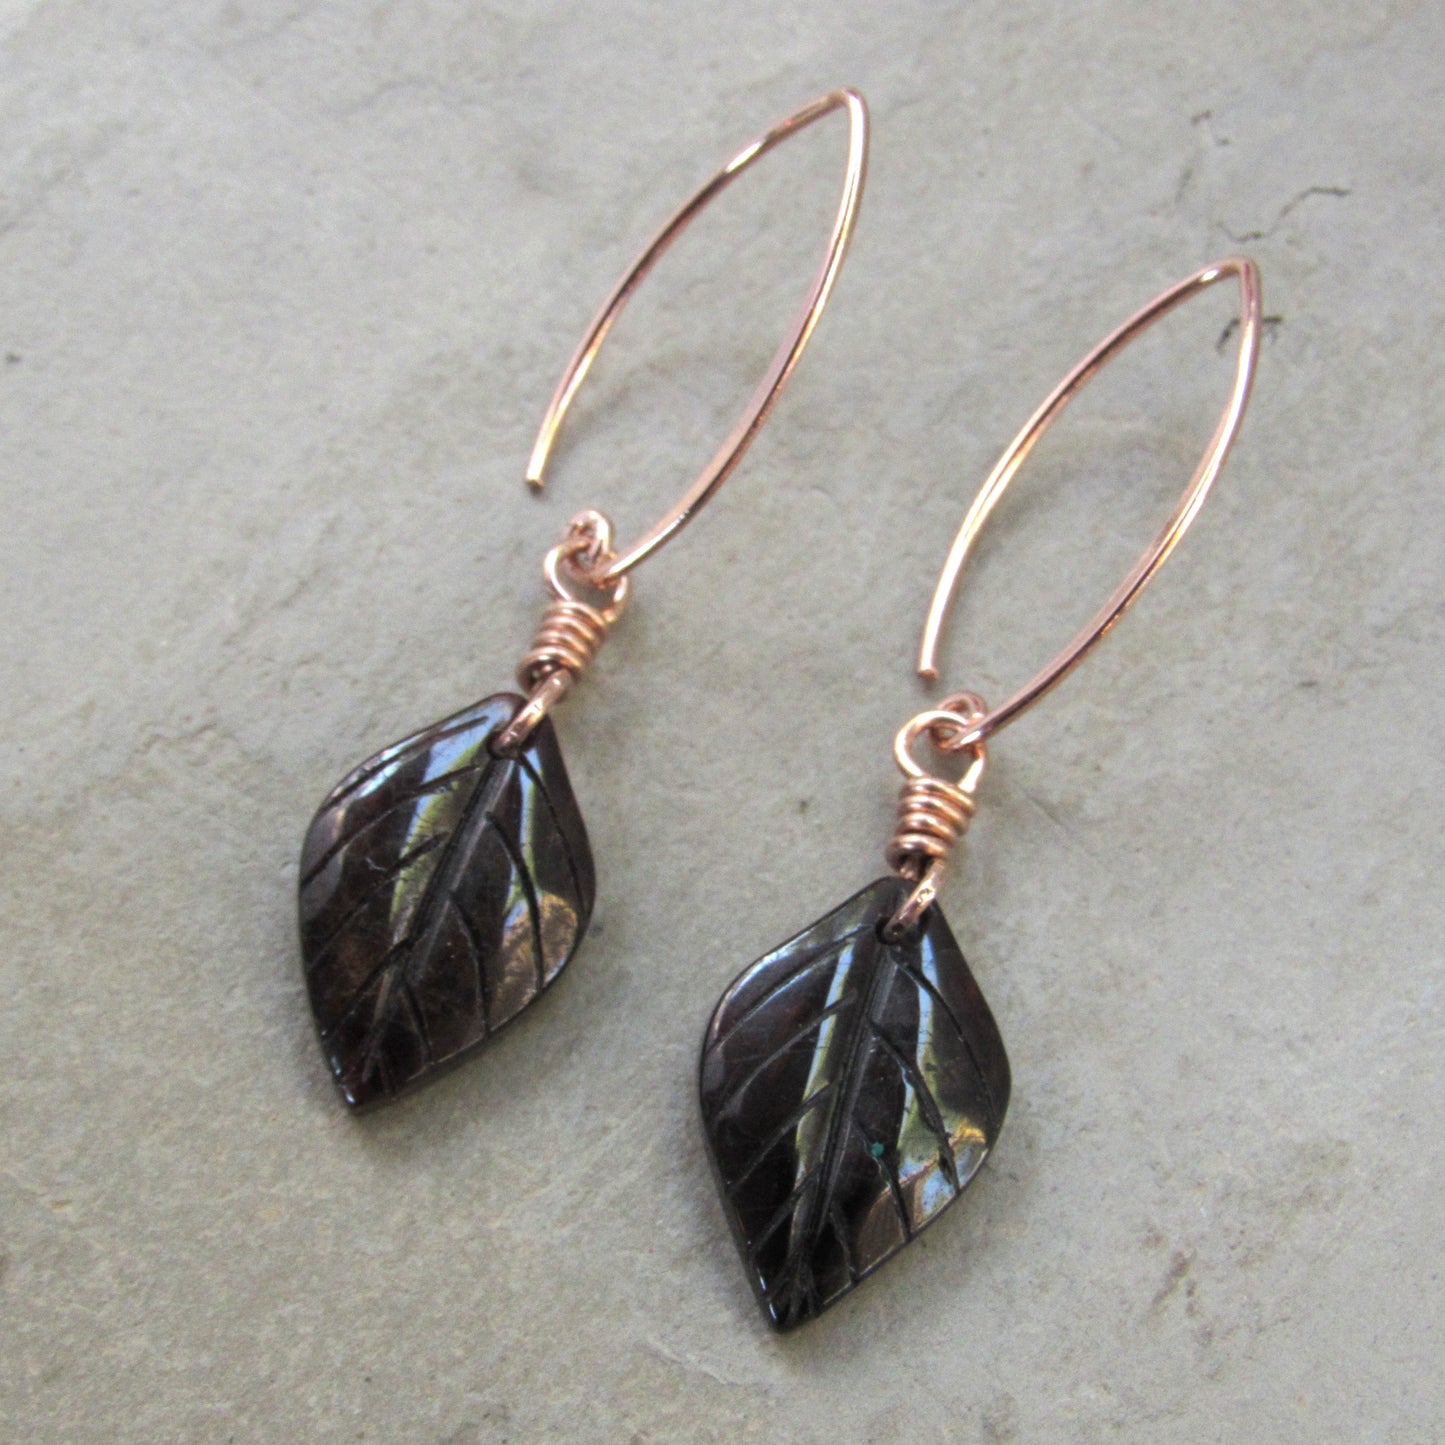 Genuine Garnet Leaf Carved Earrings Hand Wrapped with Silver Vermeil Wire